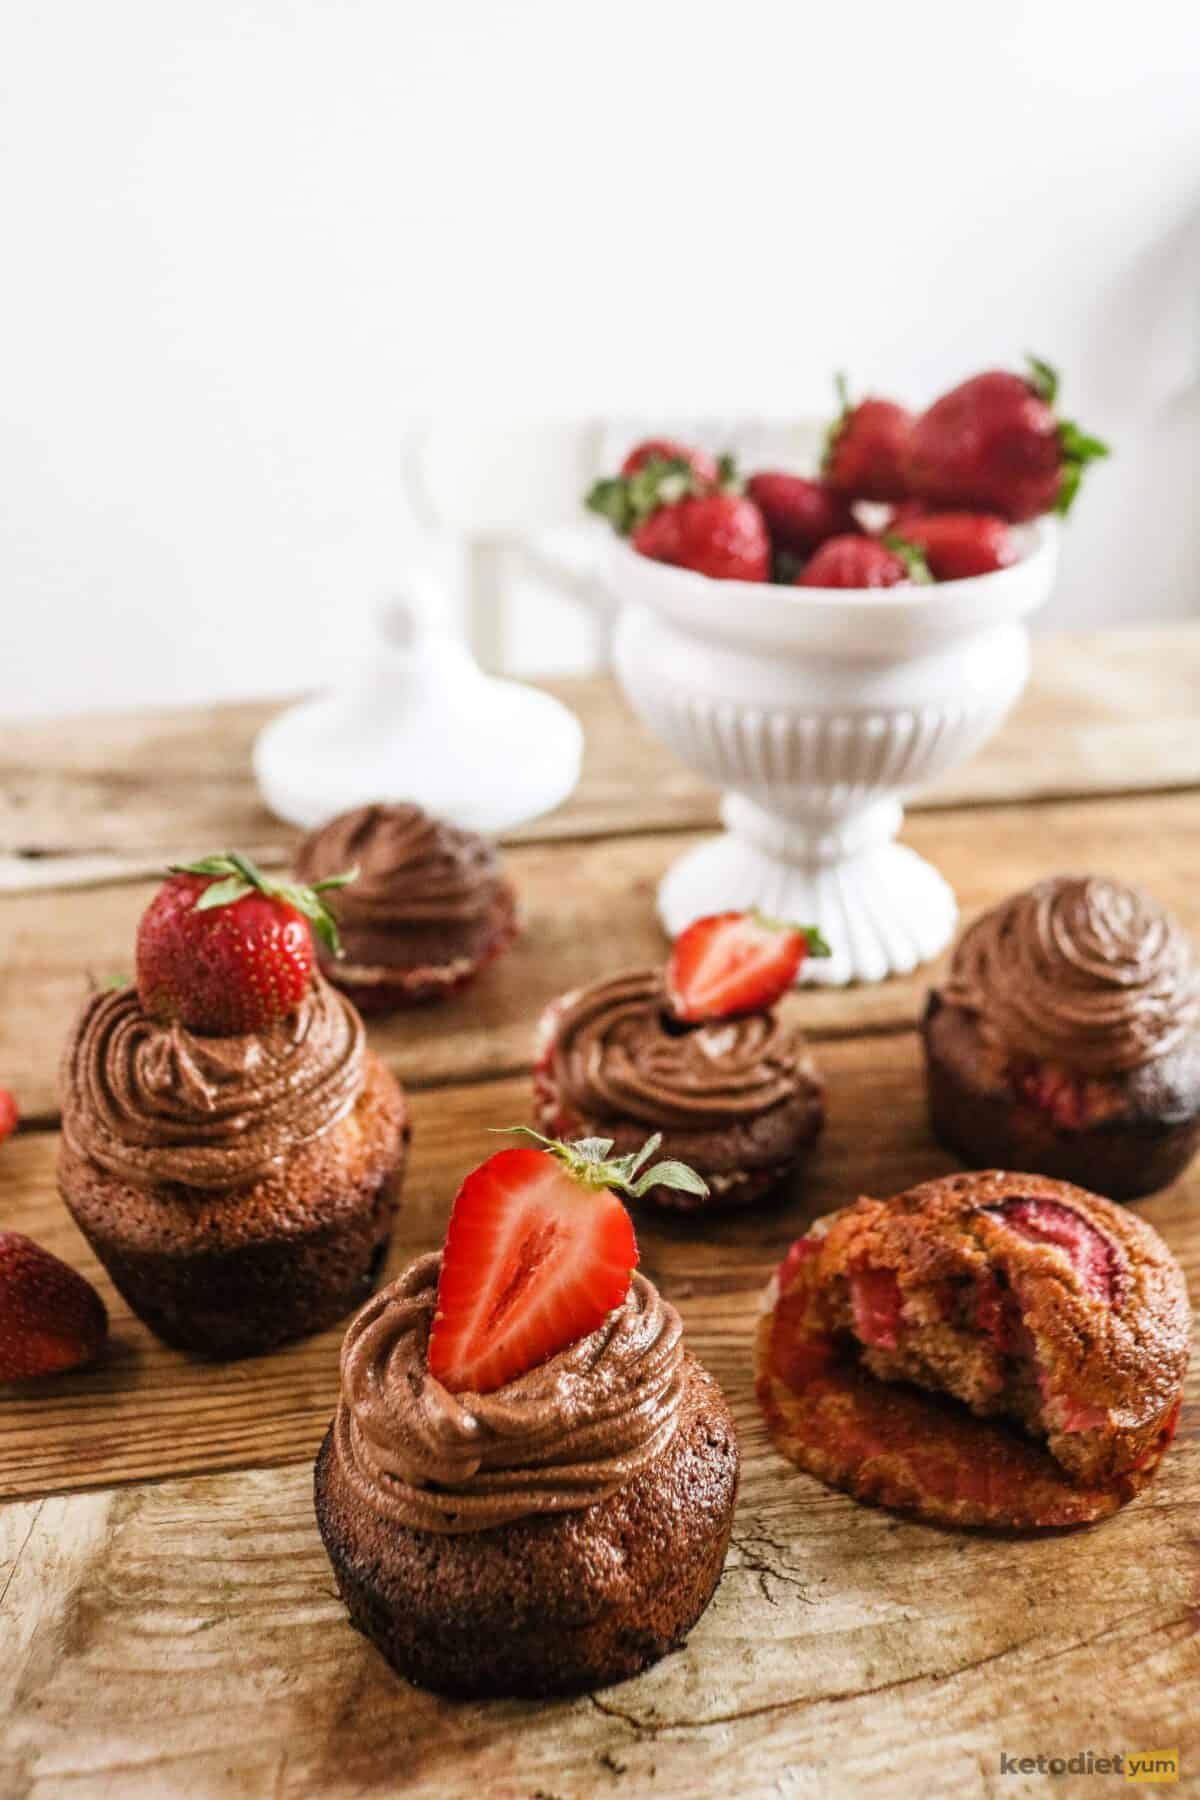 Indulge in a rich, decadent treat with these Keto Chocolate Cupcakes made with almond flour and coconut flour. The combination of chocolate, vanilla, and fresh strawberries in the batter makes these cupcakes a guilt-free pleasure.